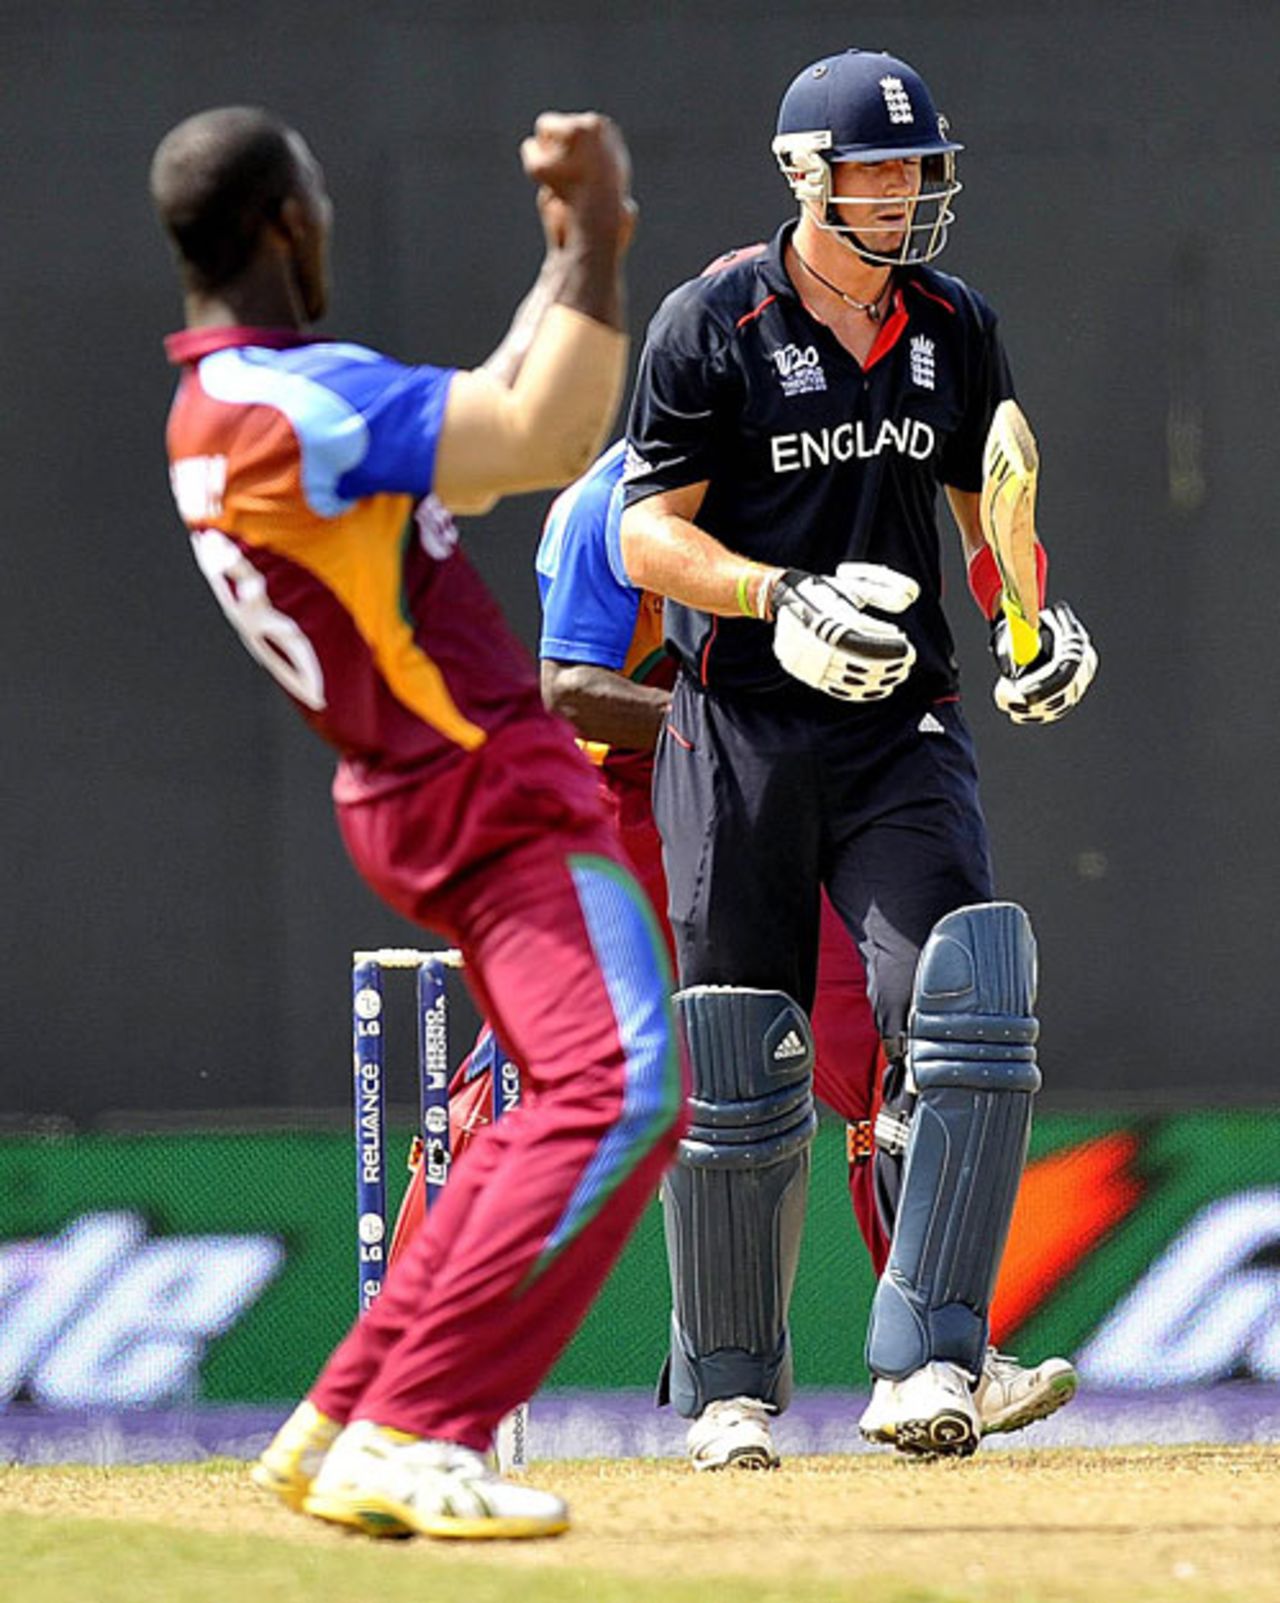 Kevin Pietersen started well but was caught on the boundary off Darren Sammy, West Indies v England, ICC World Twenty20, Guyana, May 3, 2010